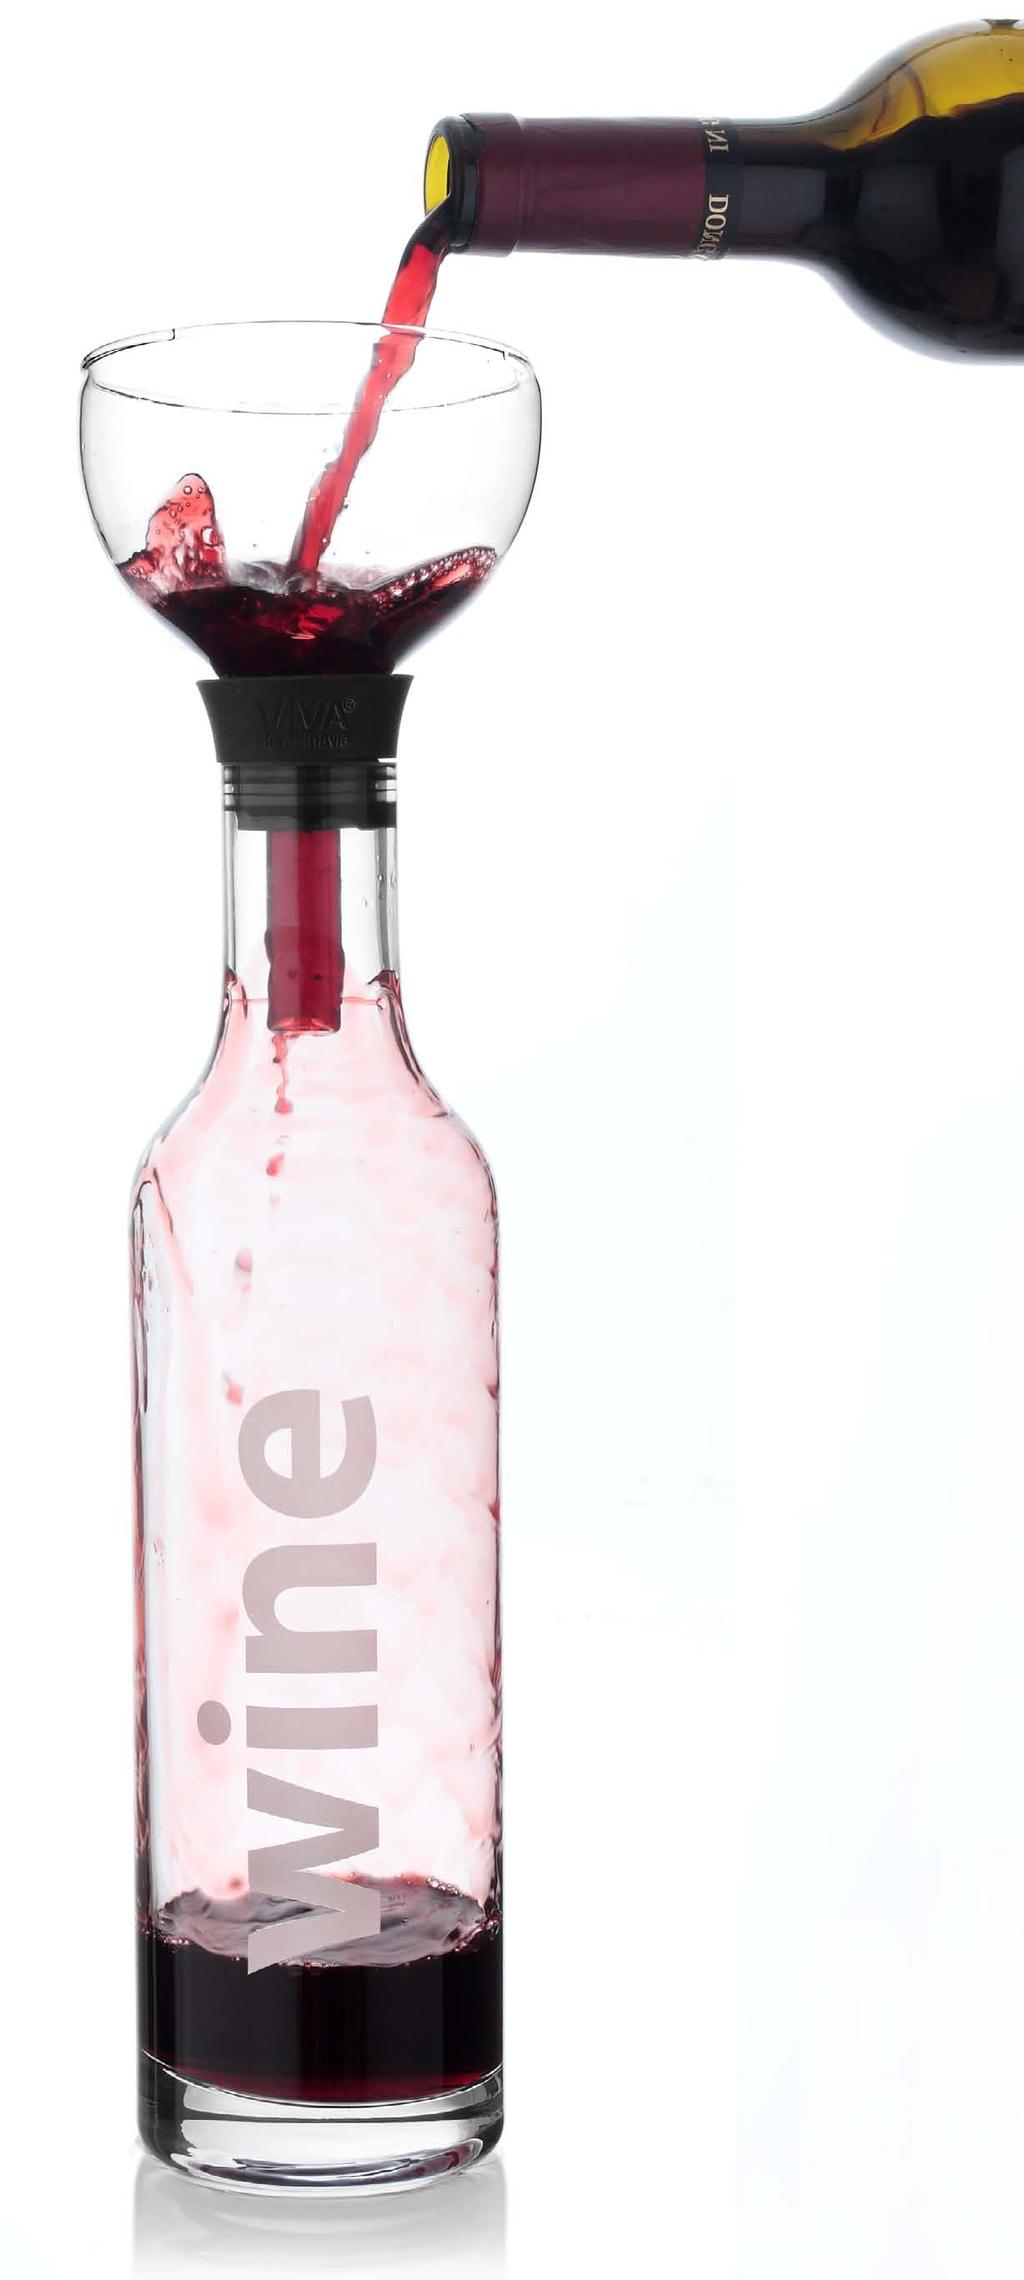 The unique funnel top helps aerate wine so it is ready to drink sooner, and pours drip-free.